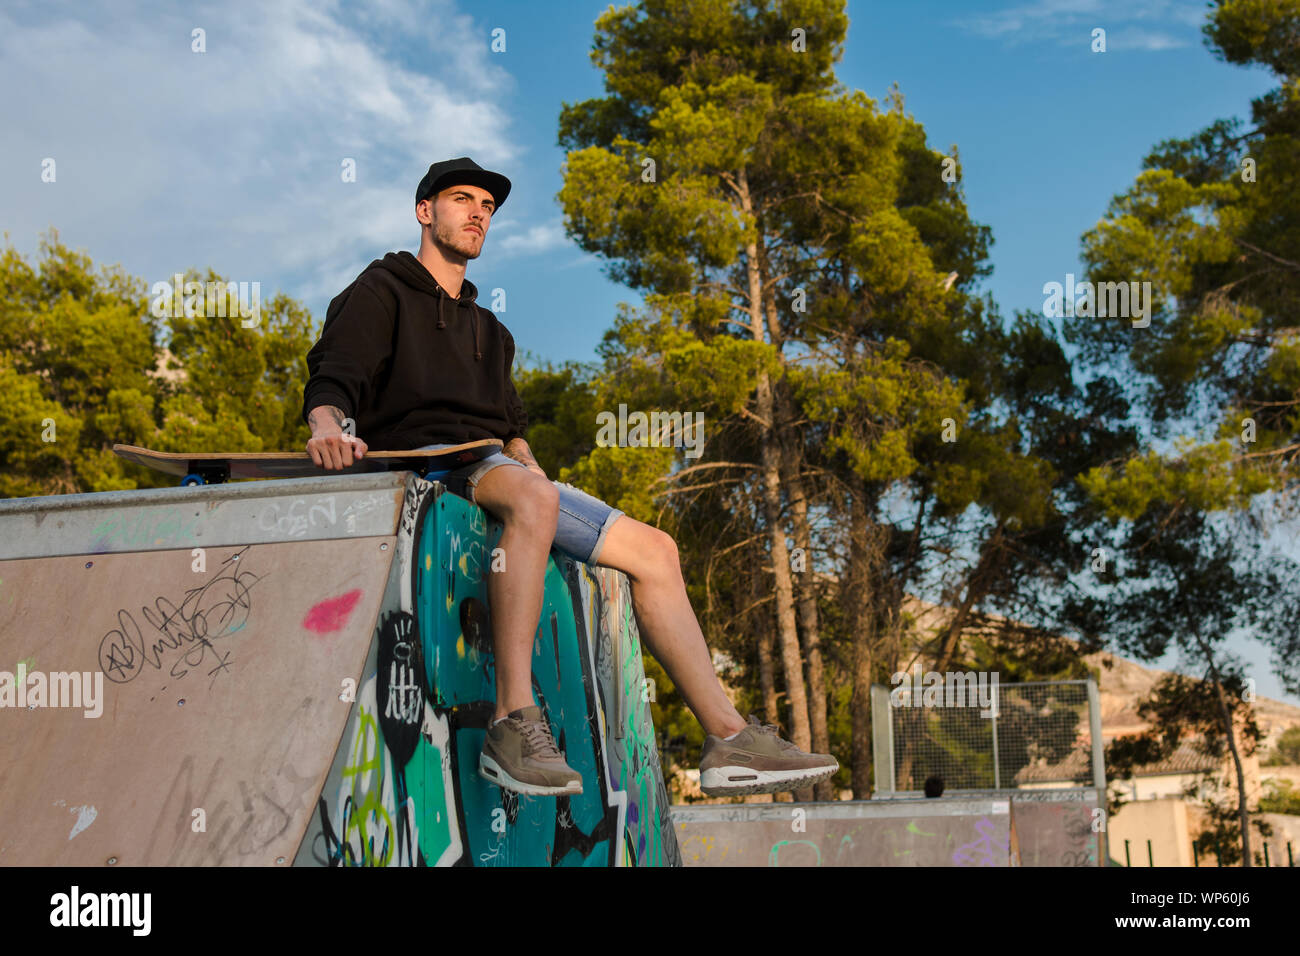 Young man on a skate in a skating court Stock Photo